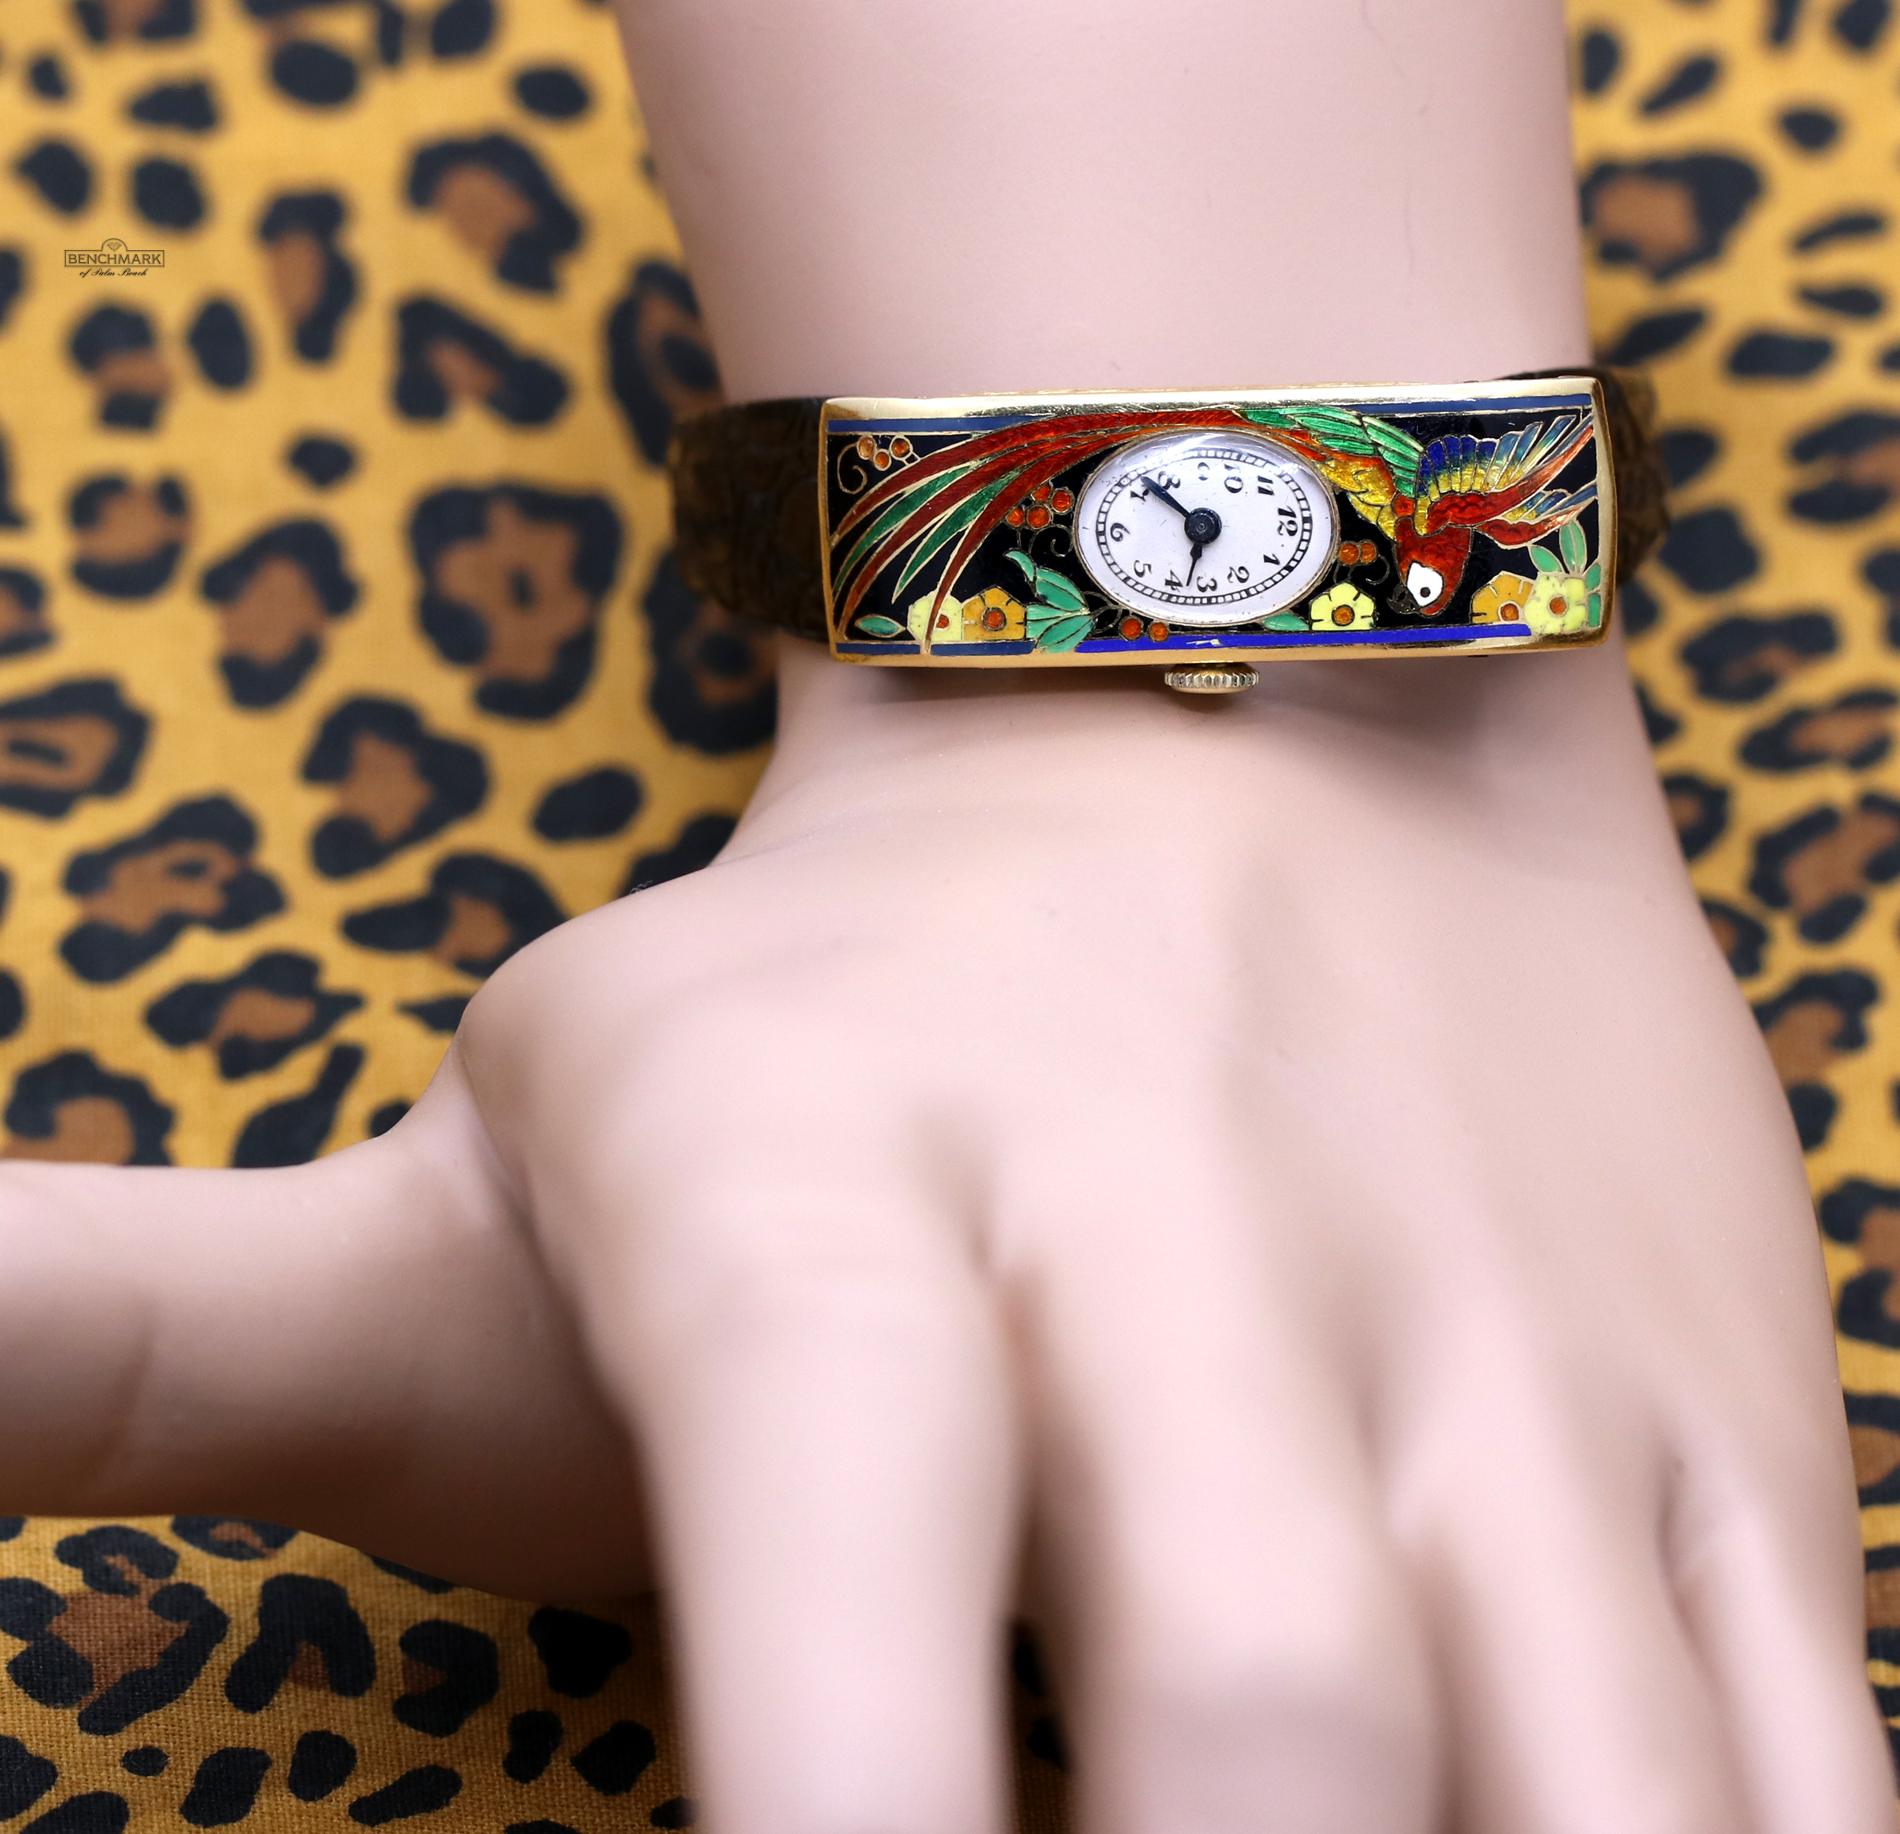 An 18K yellow gold watch, with a case measuring 40mm X 14mm, and featuring a beautifully enameled parrot with flowers, in bright, vivid colors. This watch also features a black crocograin strap.